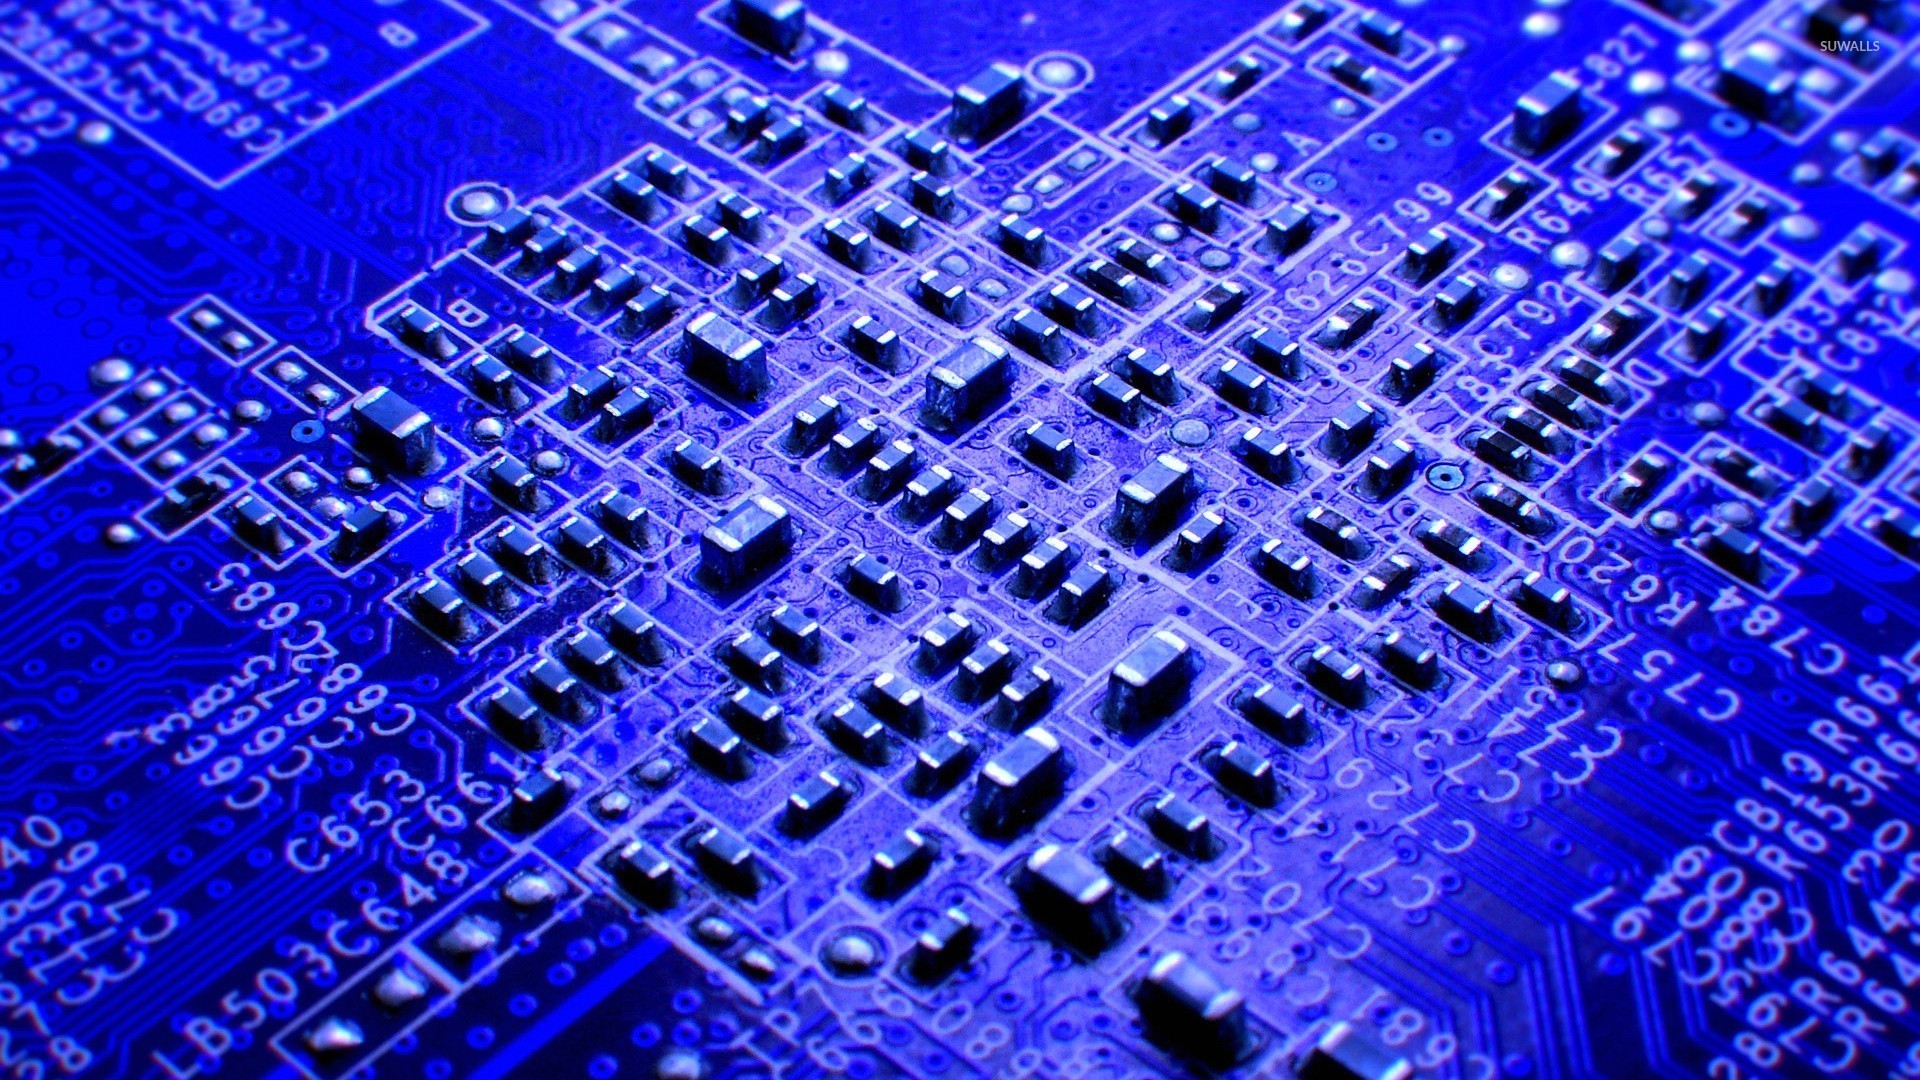 General 1920x1080 technology computer circuit boards electricity CPU motherboards microchip PCB hardware